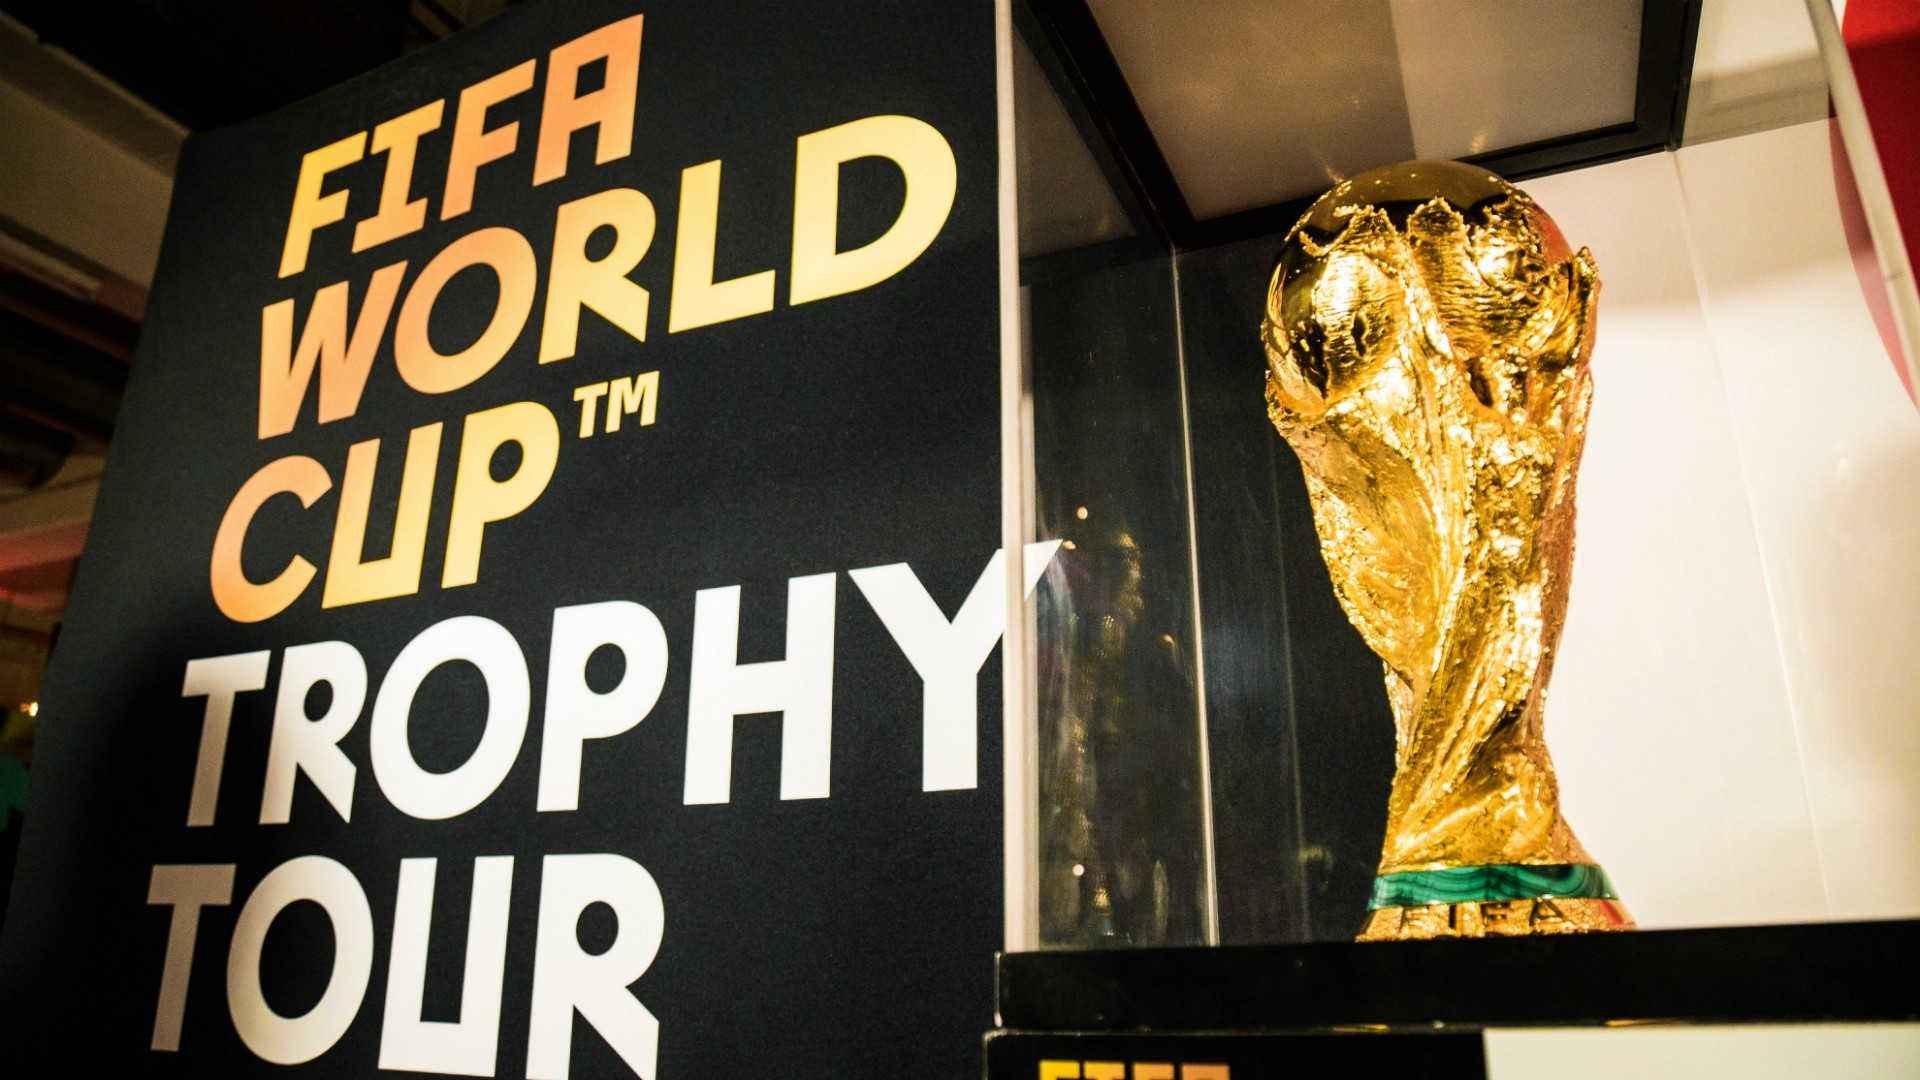 Join the World Cup Trophy Tour in Germany in stunning 360!